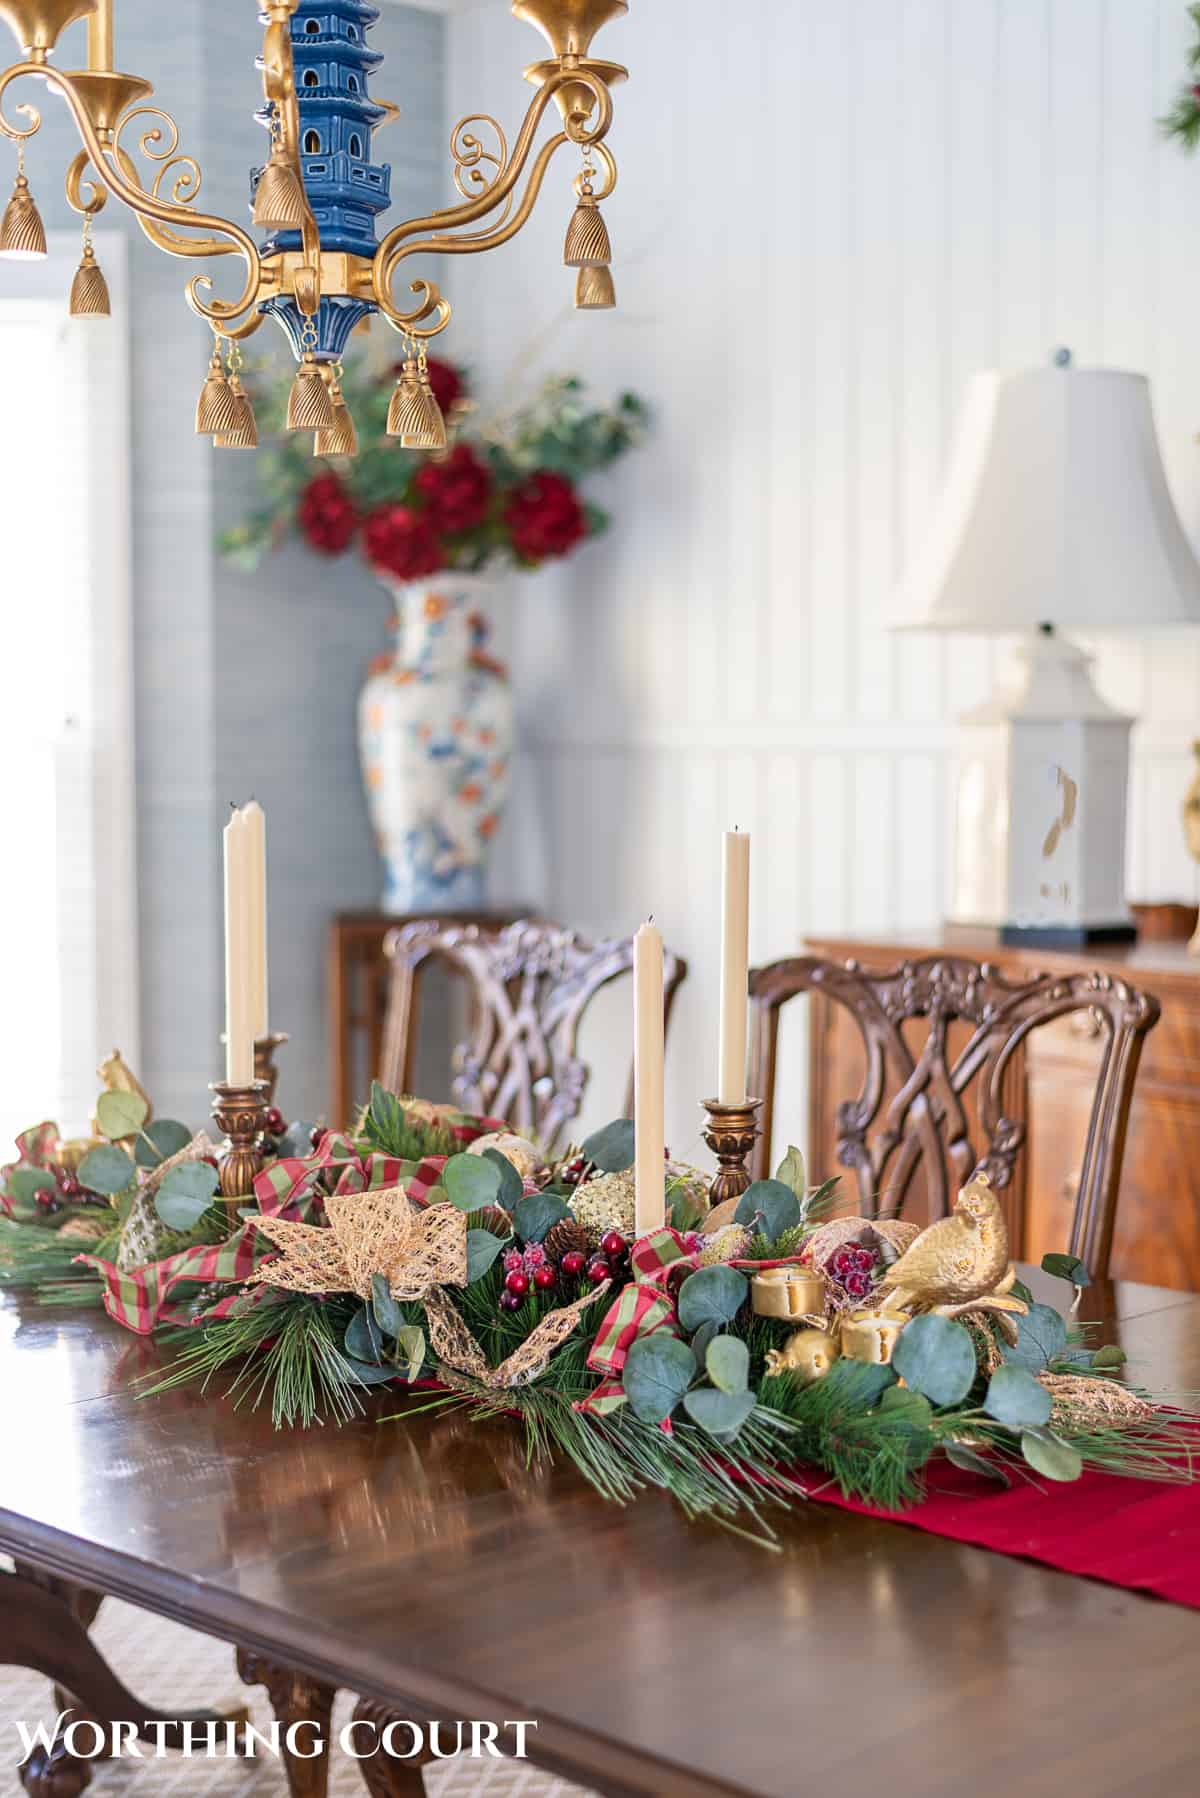 Christmas centerpiece on a wood dining room table made with burgundy, green and gold elements.